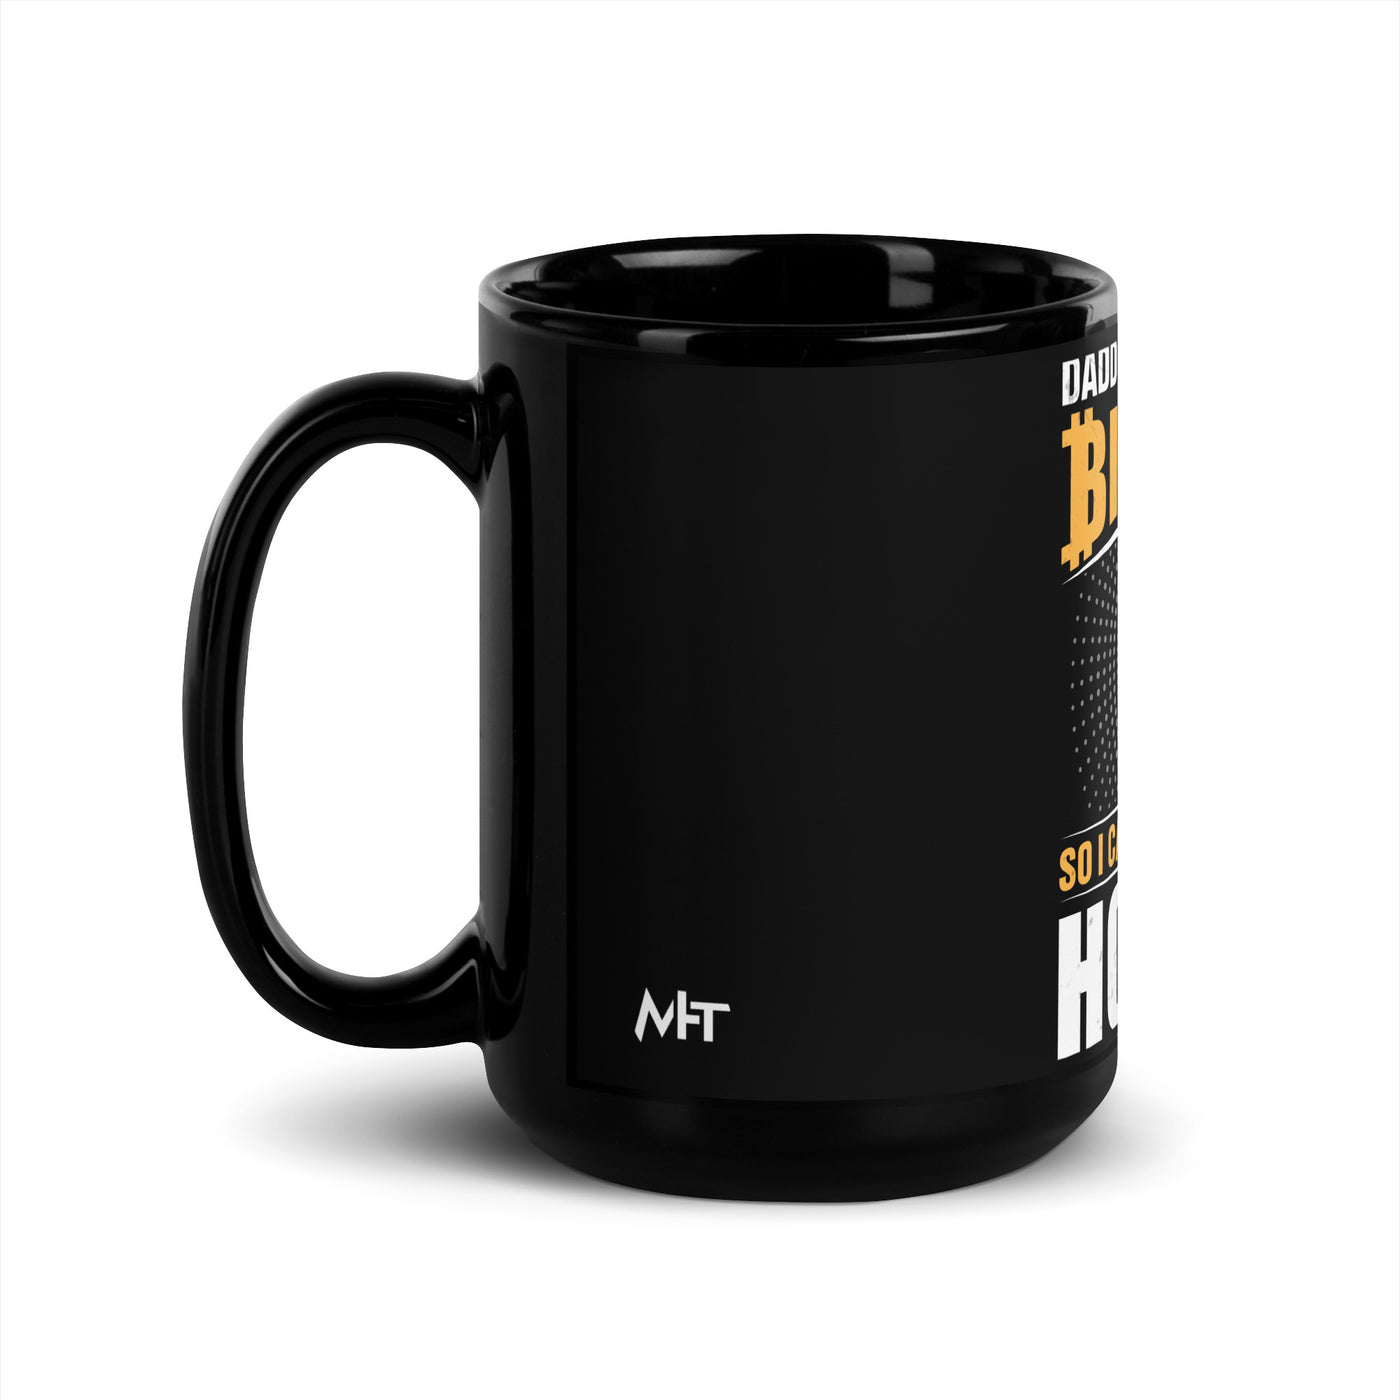 Daddy got me some Bitcoin, so I can be toddler holder - Black Glossy Mug